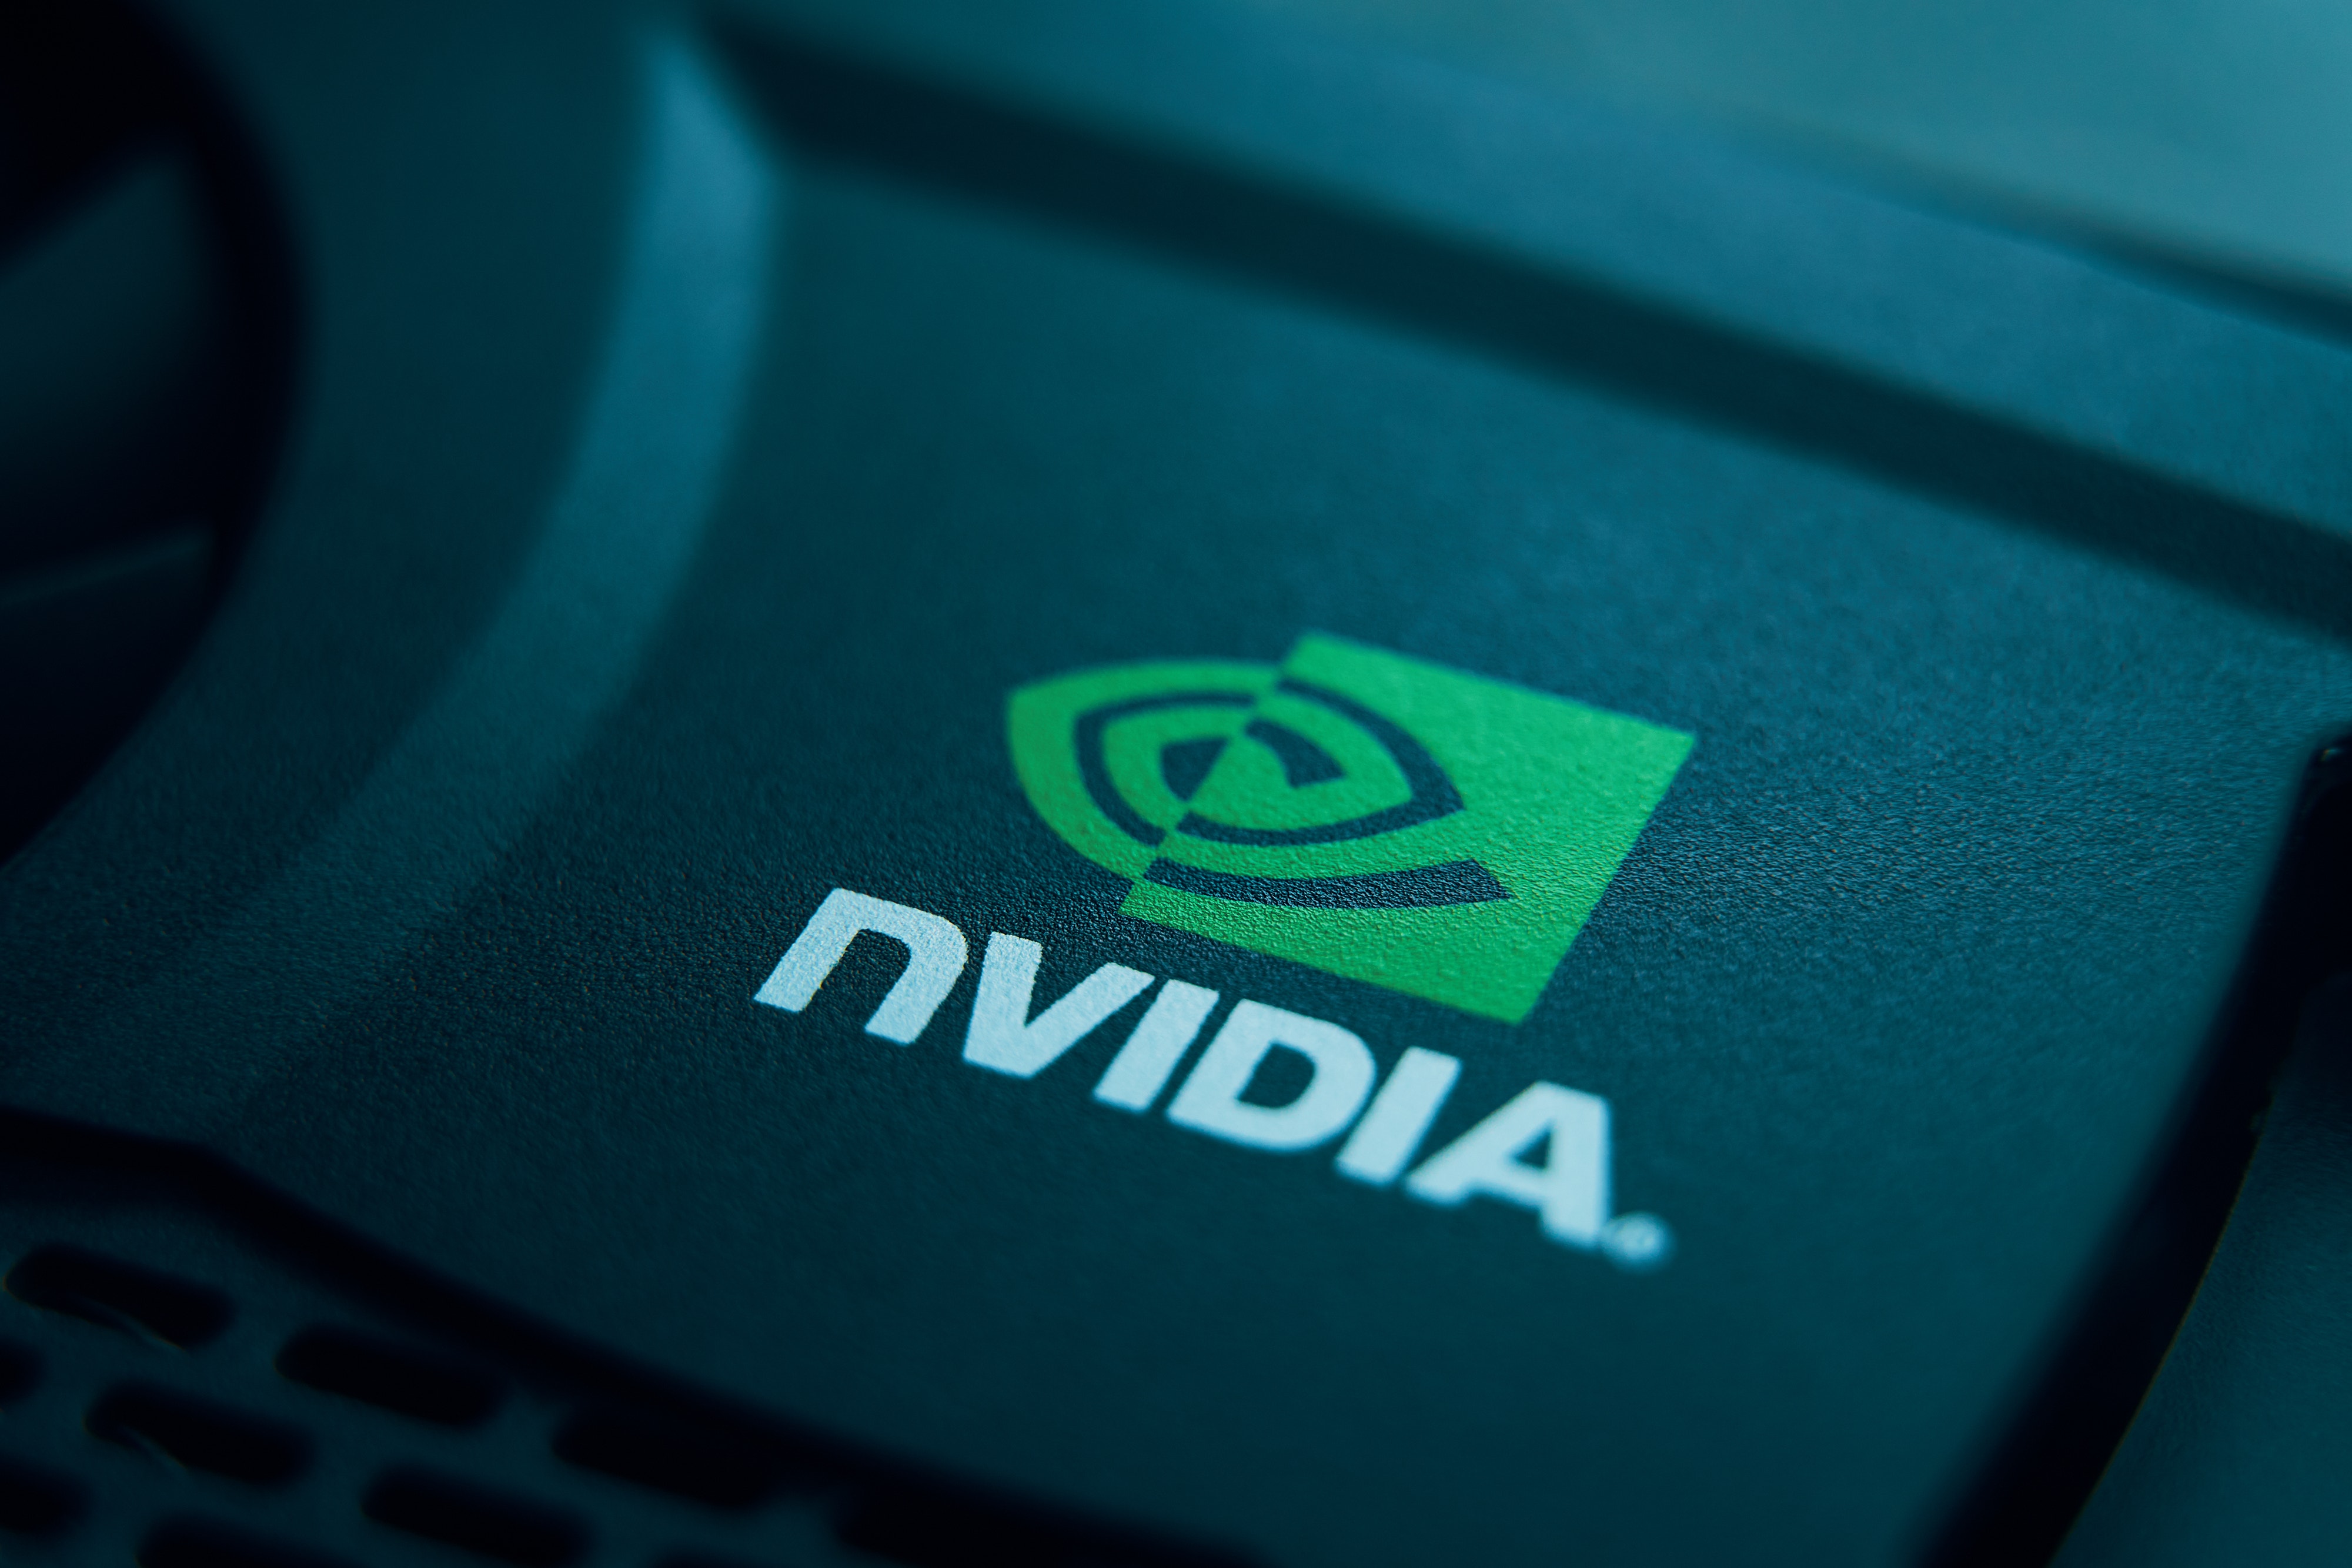 Cathie Wood Makes Massive Buy In Nvidia Stock: Here's What You Should Know